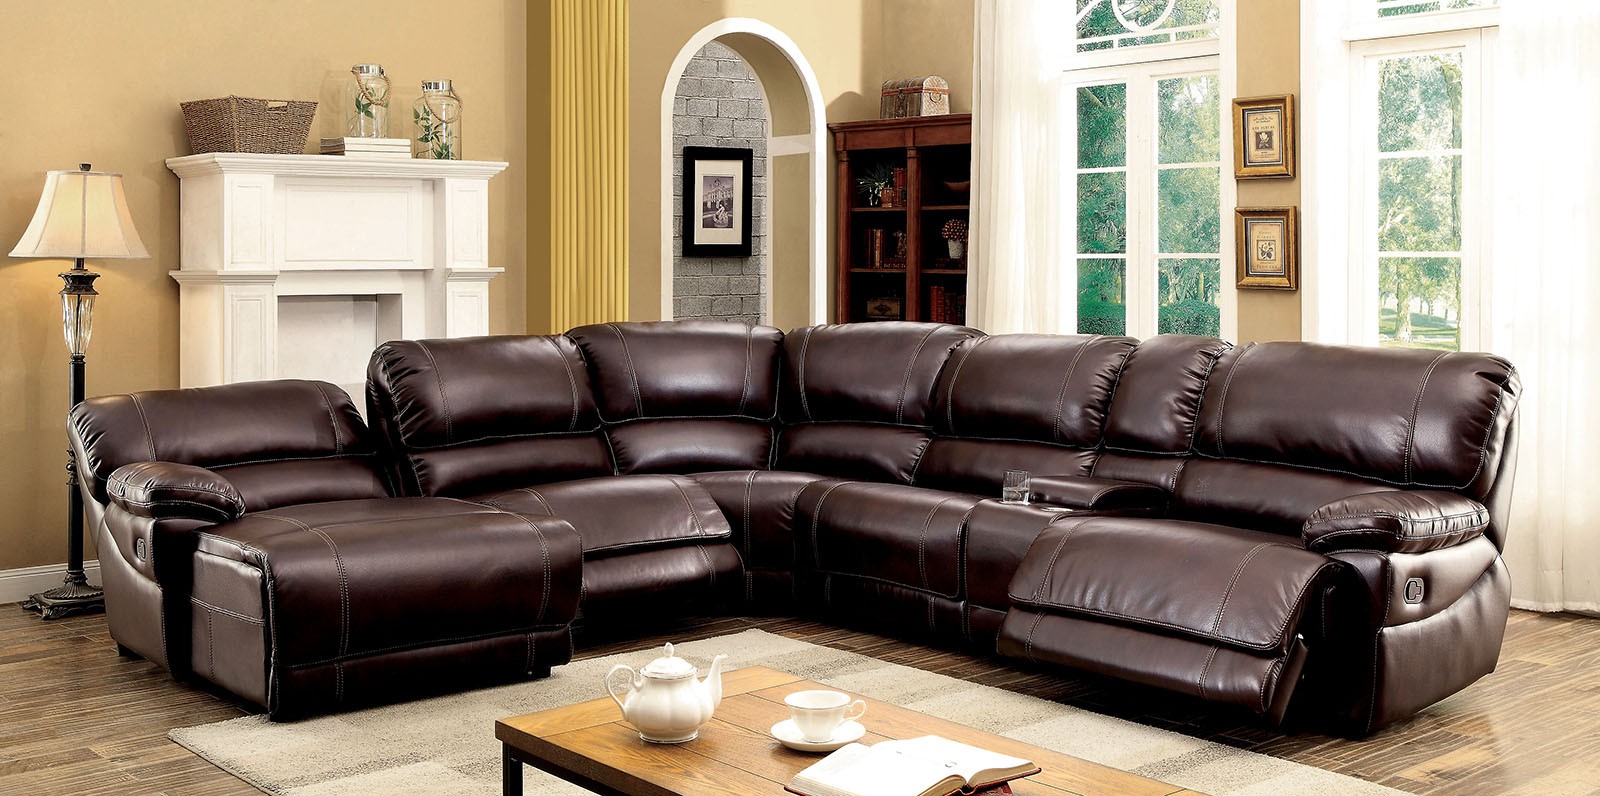 Sectional with Reclining Chairs